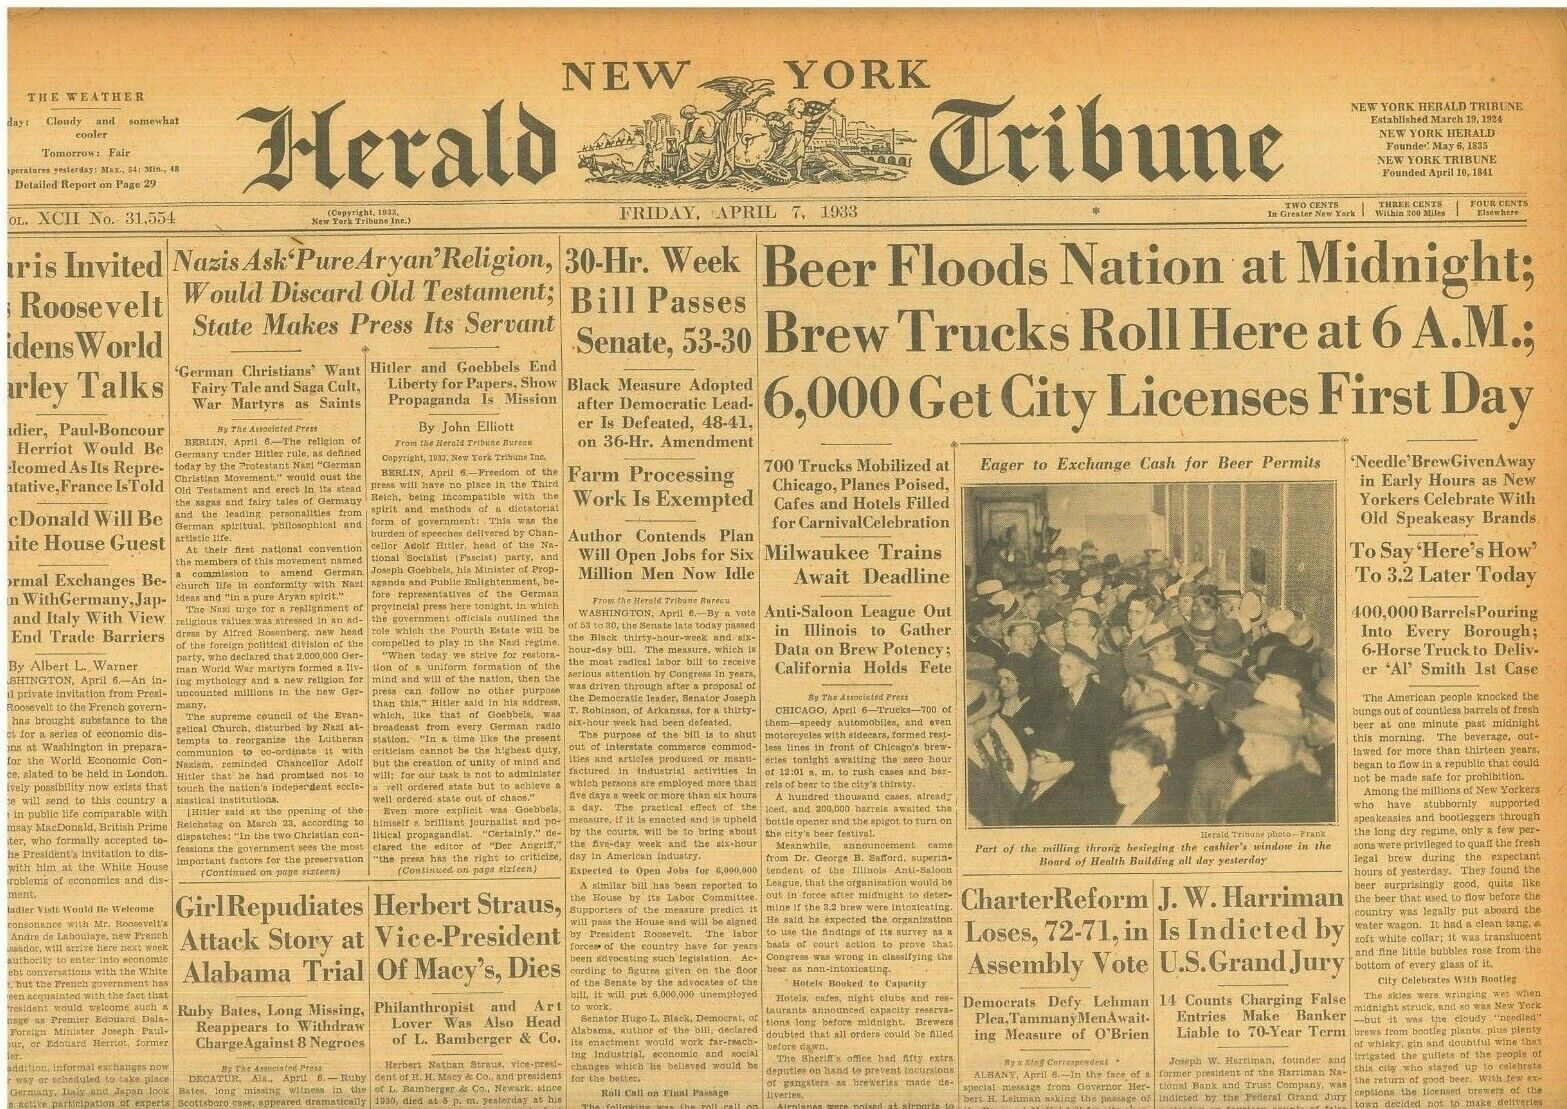 Prohibition Ends Beer Floods Nation Trucks Roll Cash for Permits April 7 1933 B4